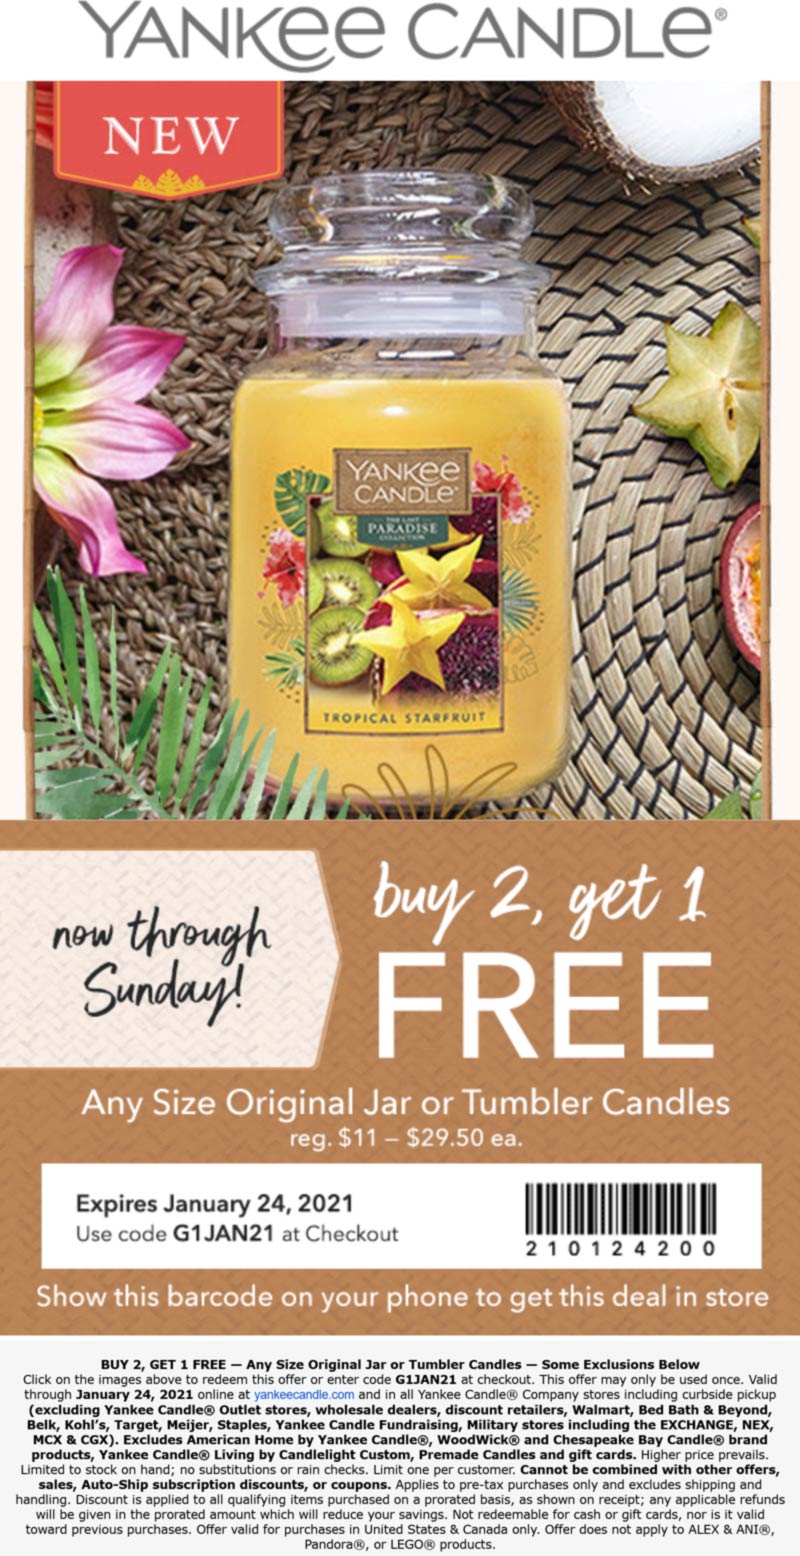 Yankee Candle stores Coupon  3rd candle free at Yankee Candle, or online via promo code G1JAN21 #yankeecandle 